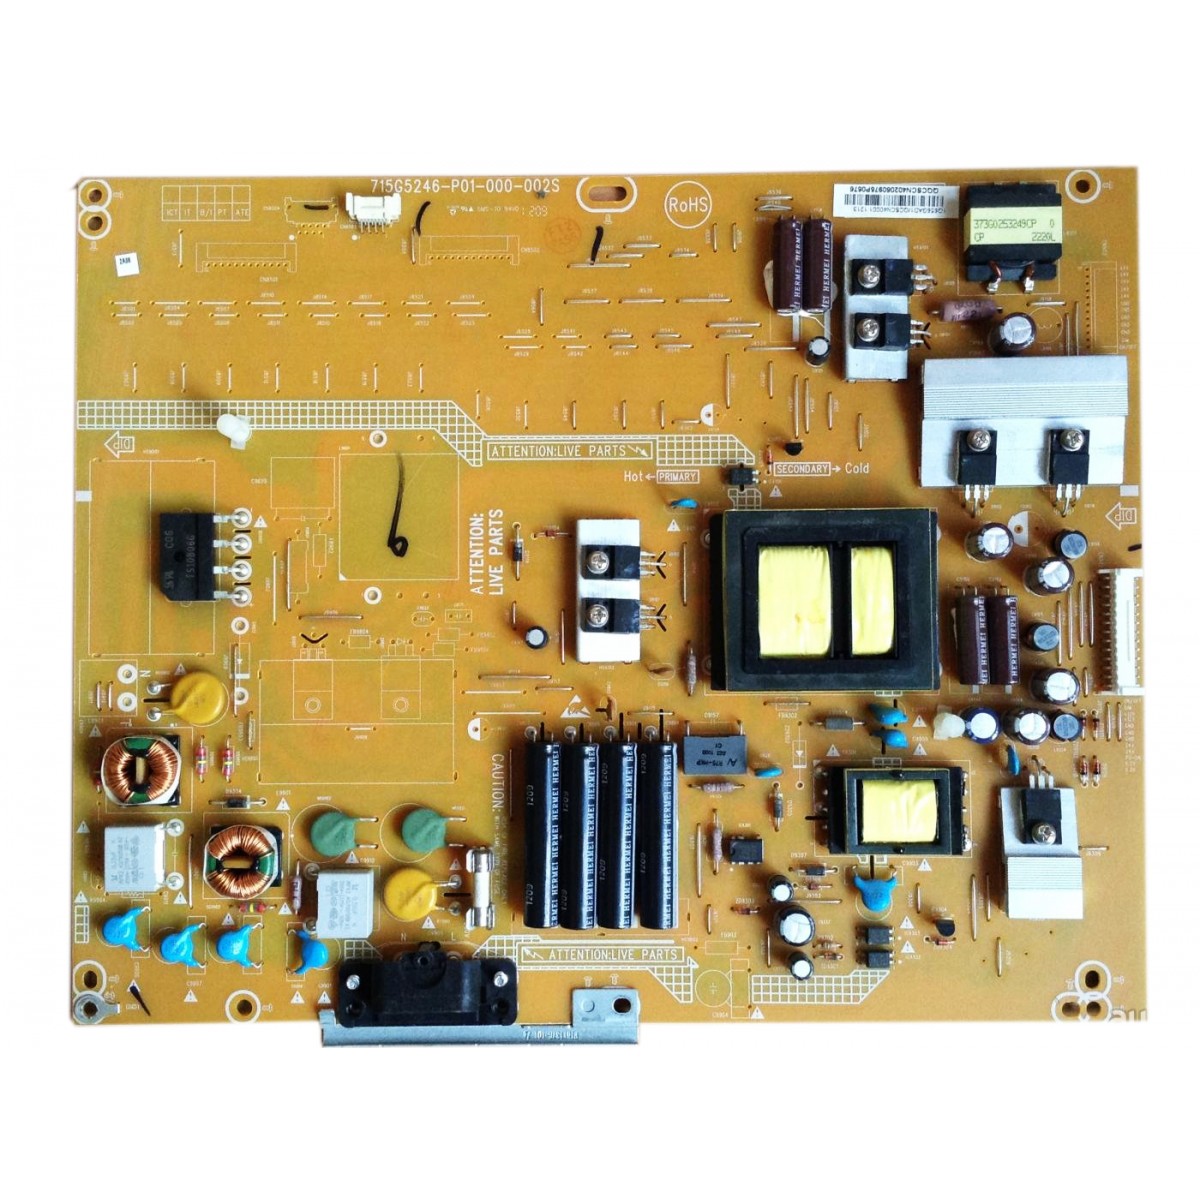 715G5246-P01-000-002S , PHLPS , 42PFL4007 , LED , LC420EUE SE M2 , POWER BOARD , BESLEME KARTI